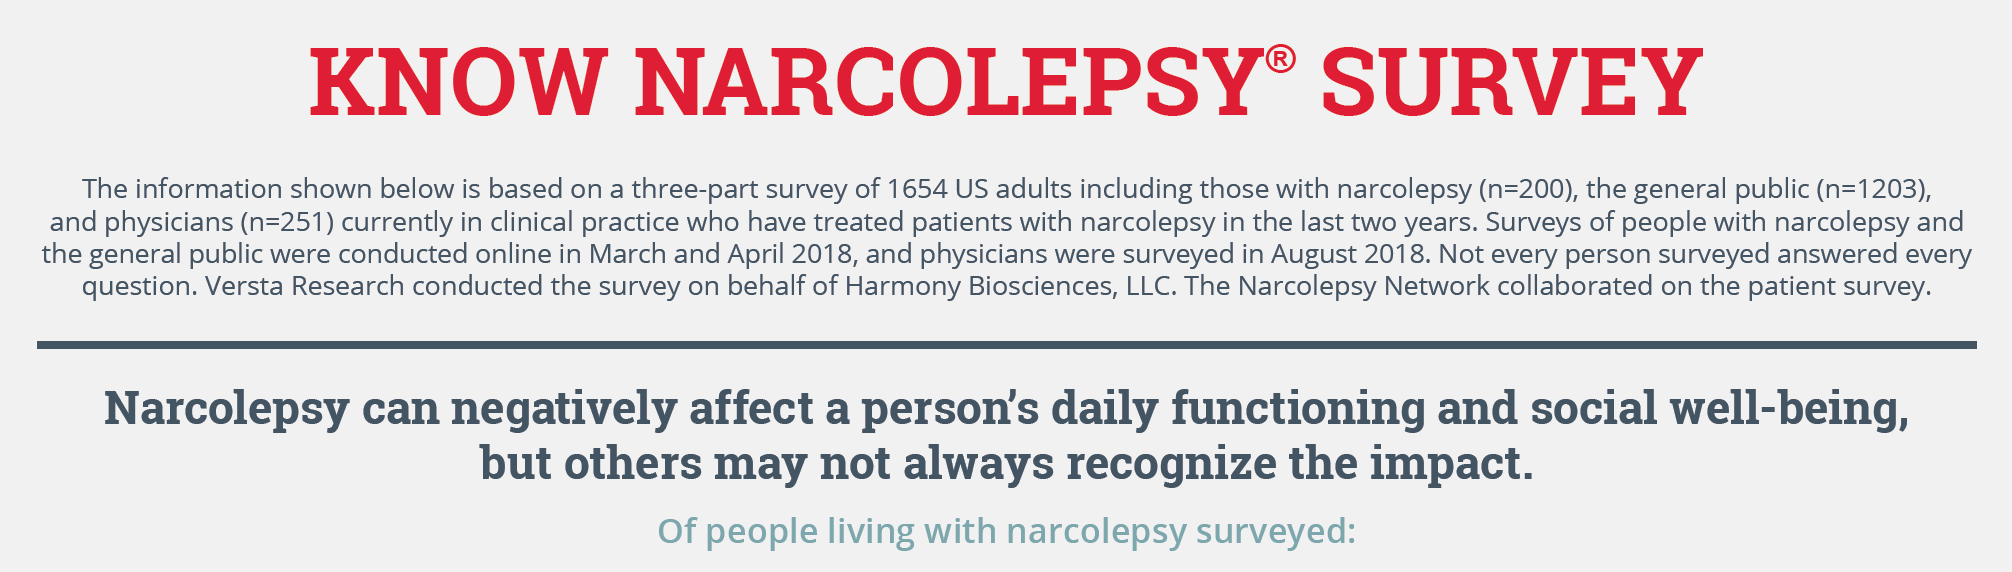 2018 survey of healthcare providers & people living with narcolepsy highlights the need for more education & new treatment options.